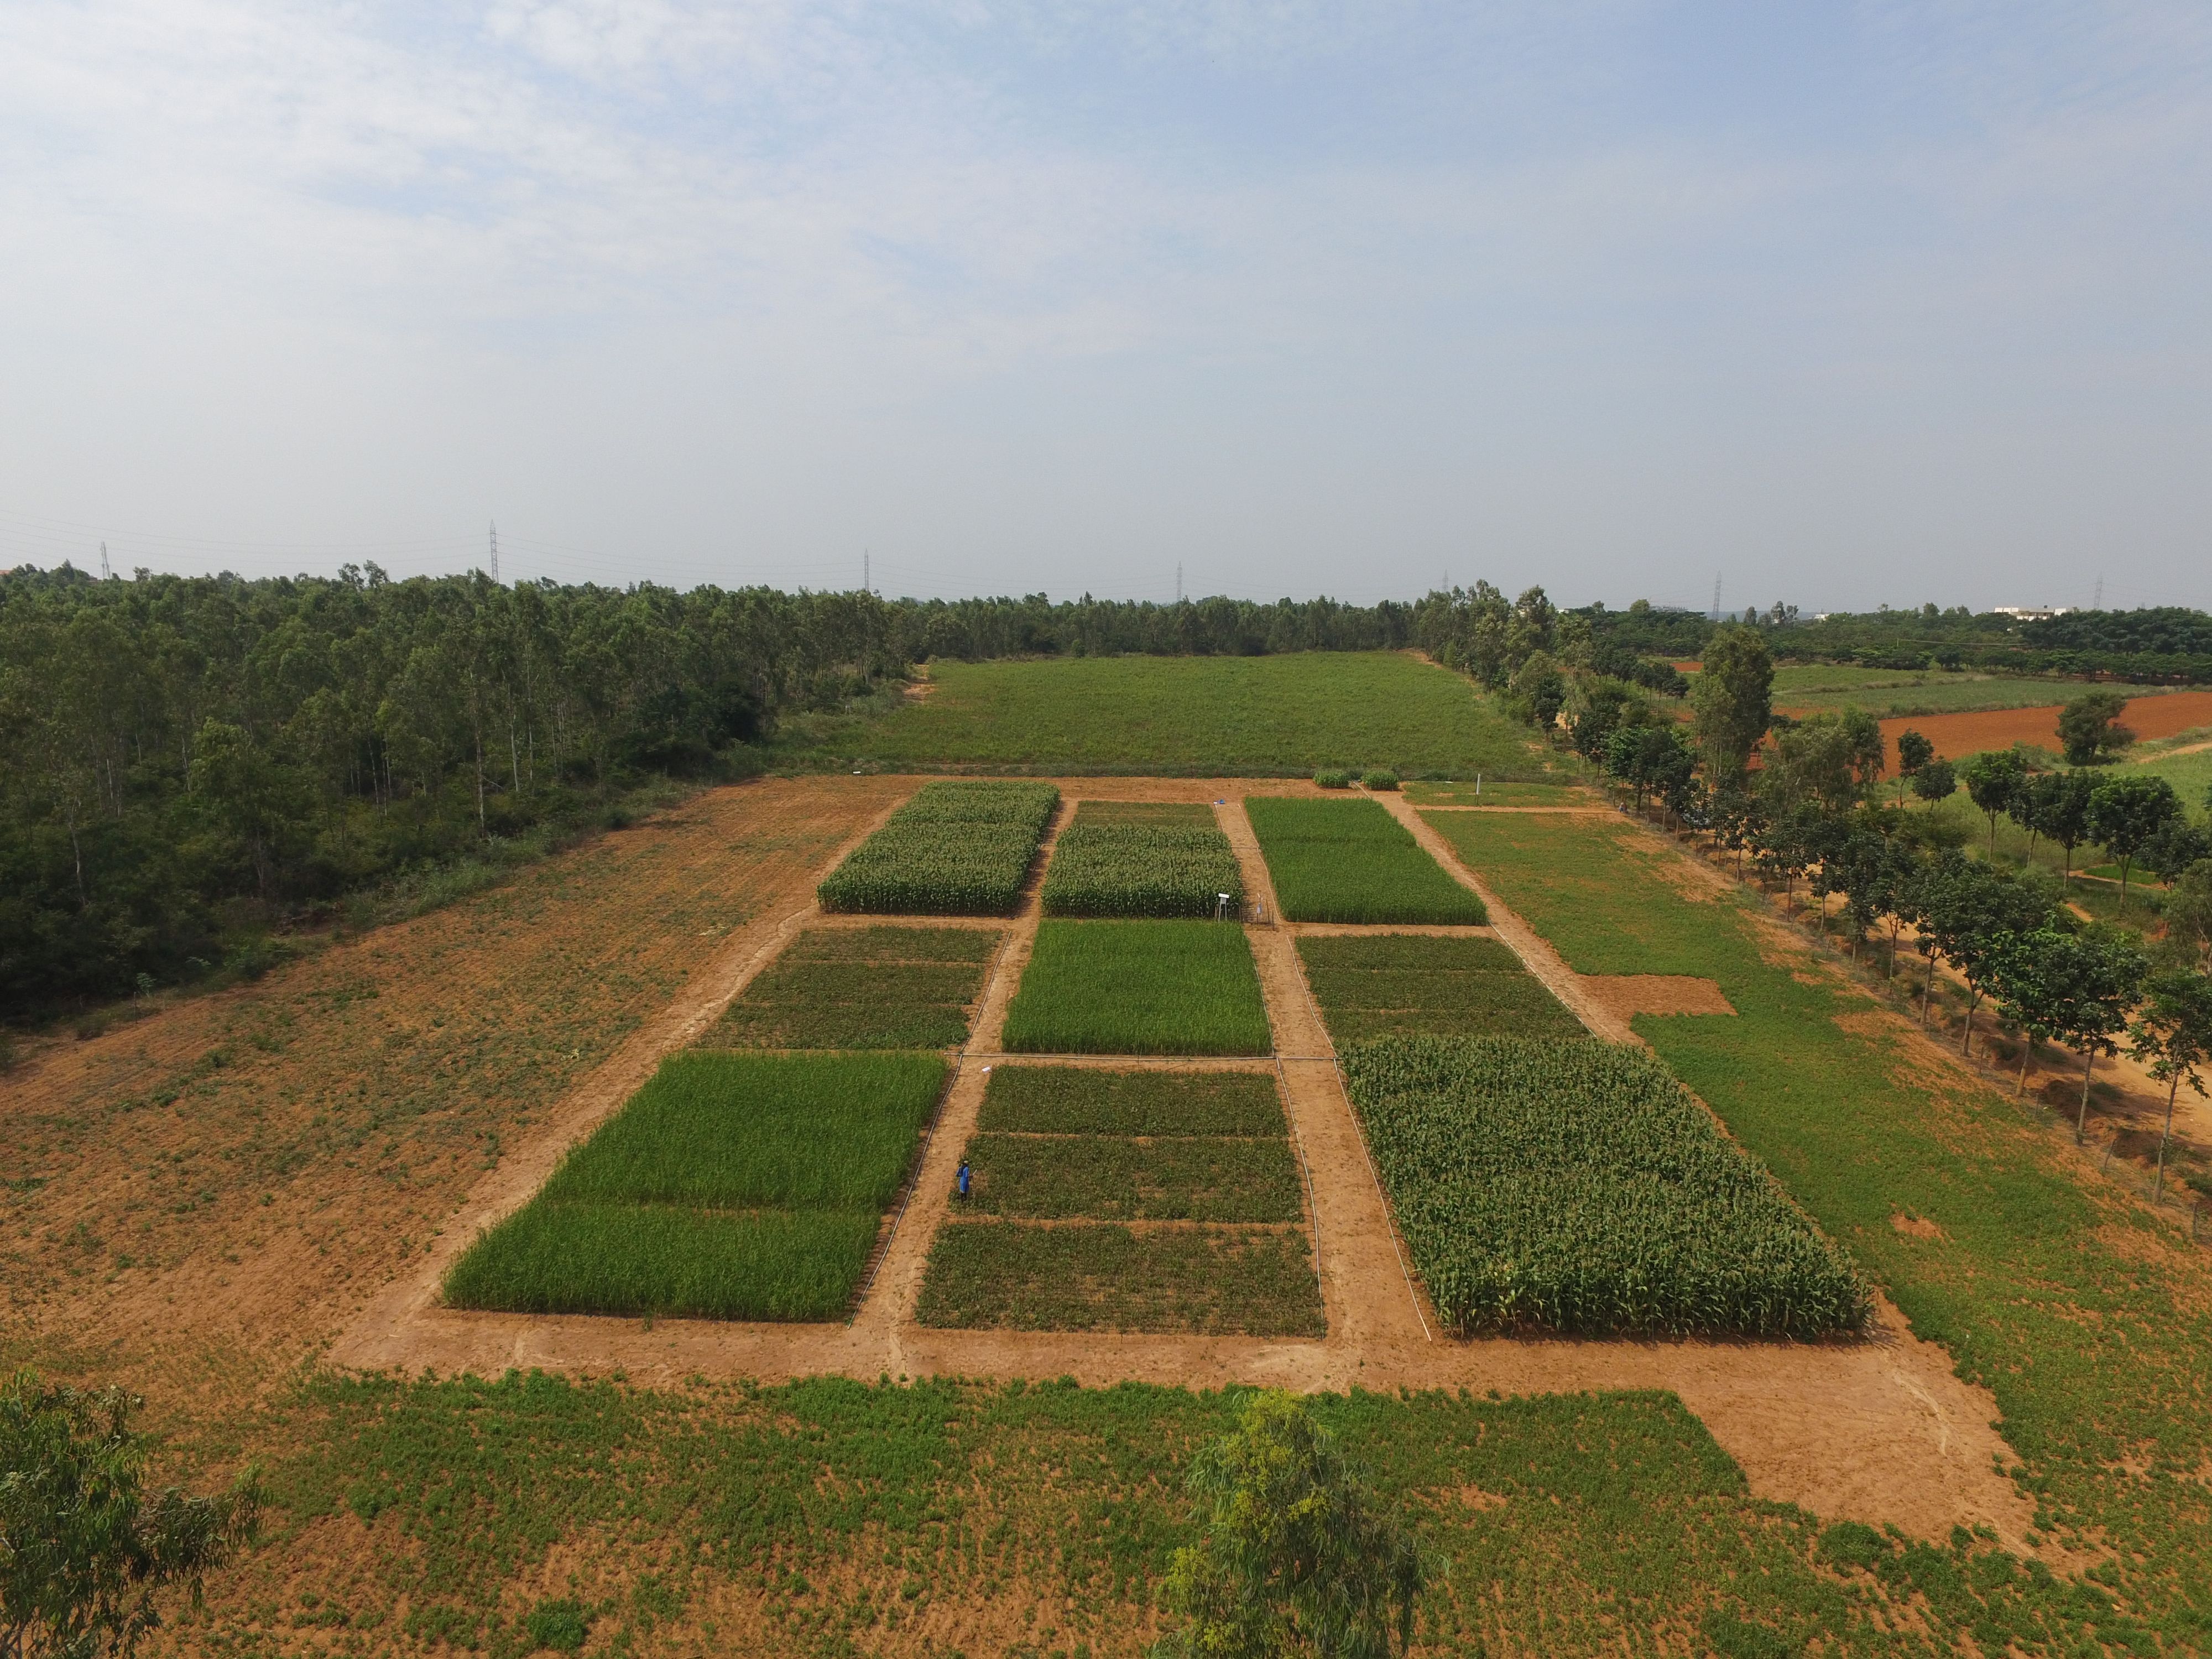 Aerial view of the factorial field experiment at GKVK. Irrigated Experiment with Kharif crops maize, finger millet, lablab.